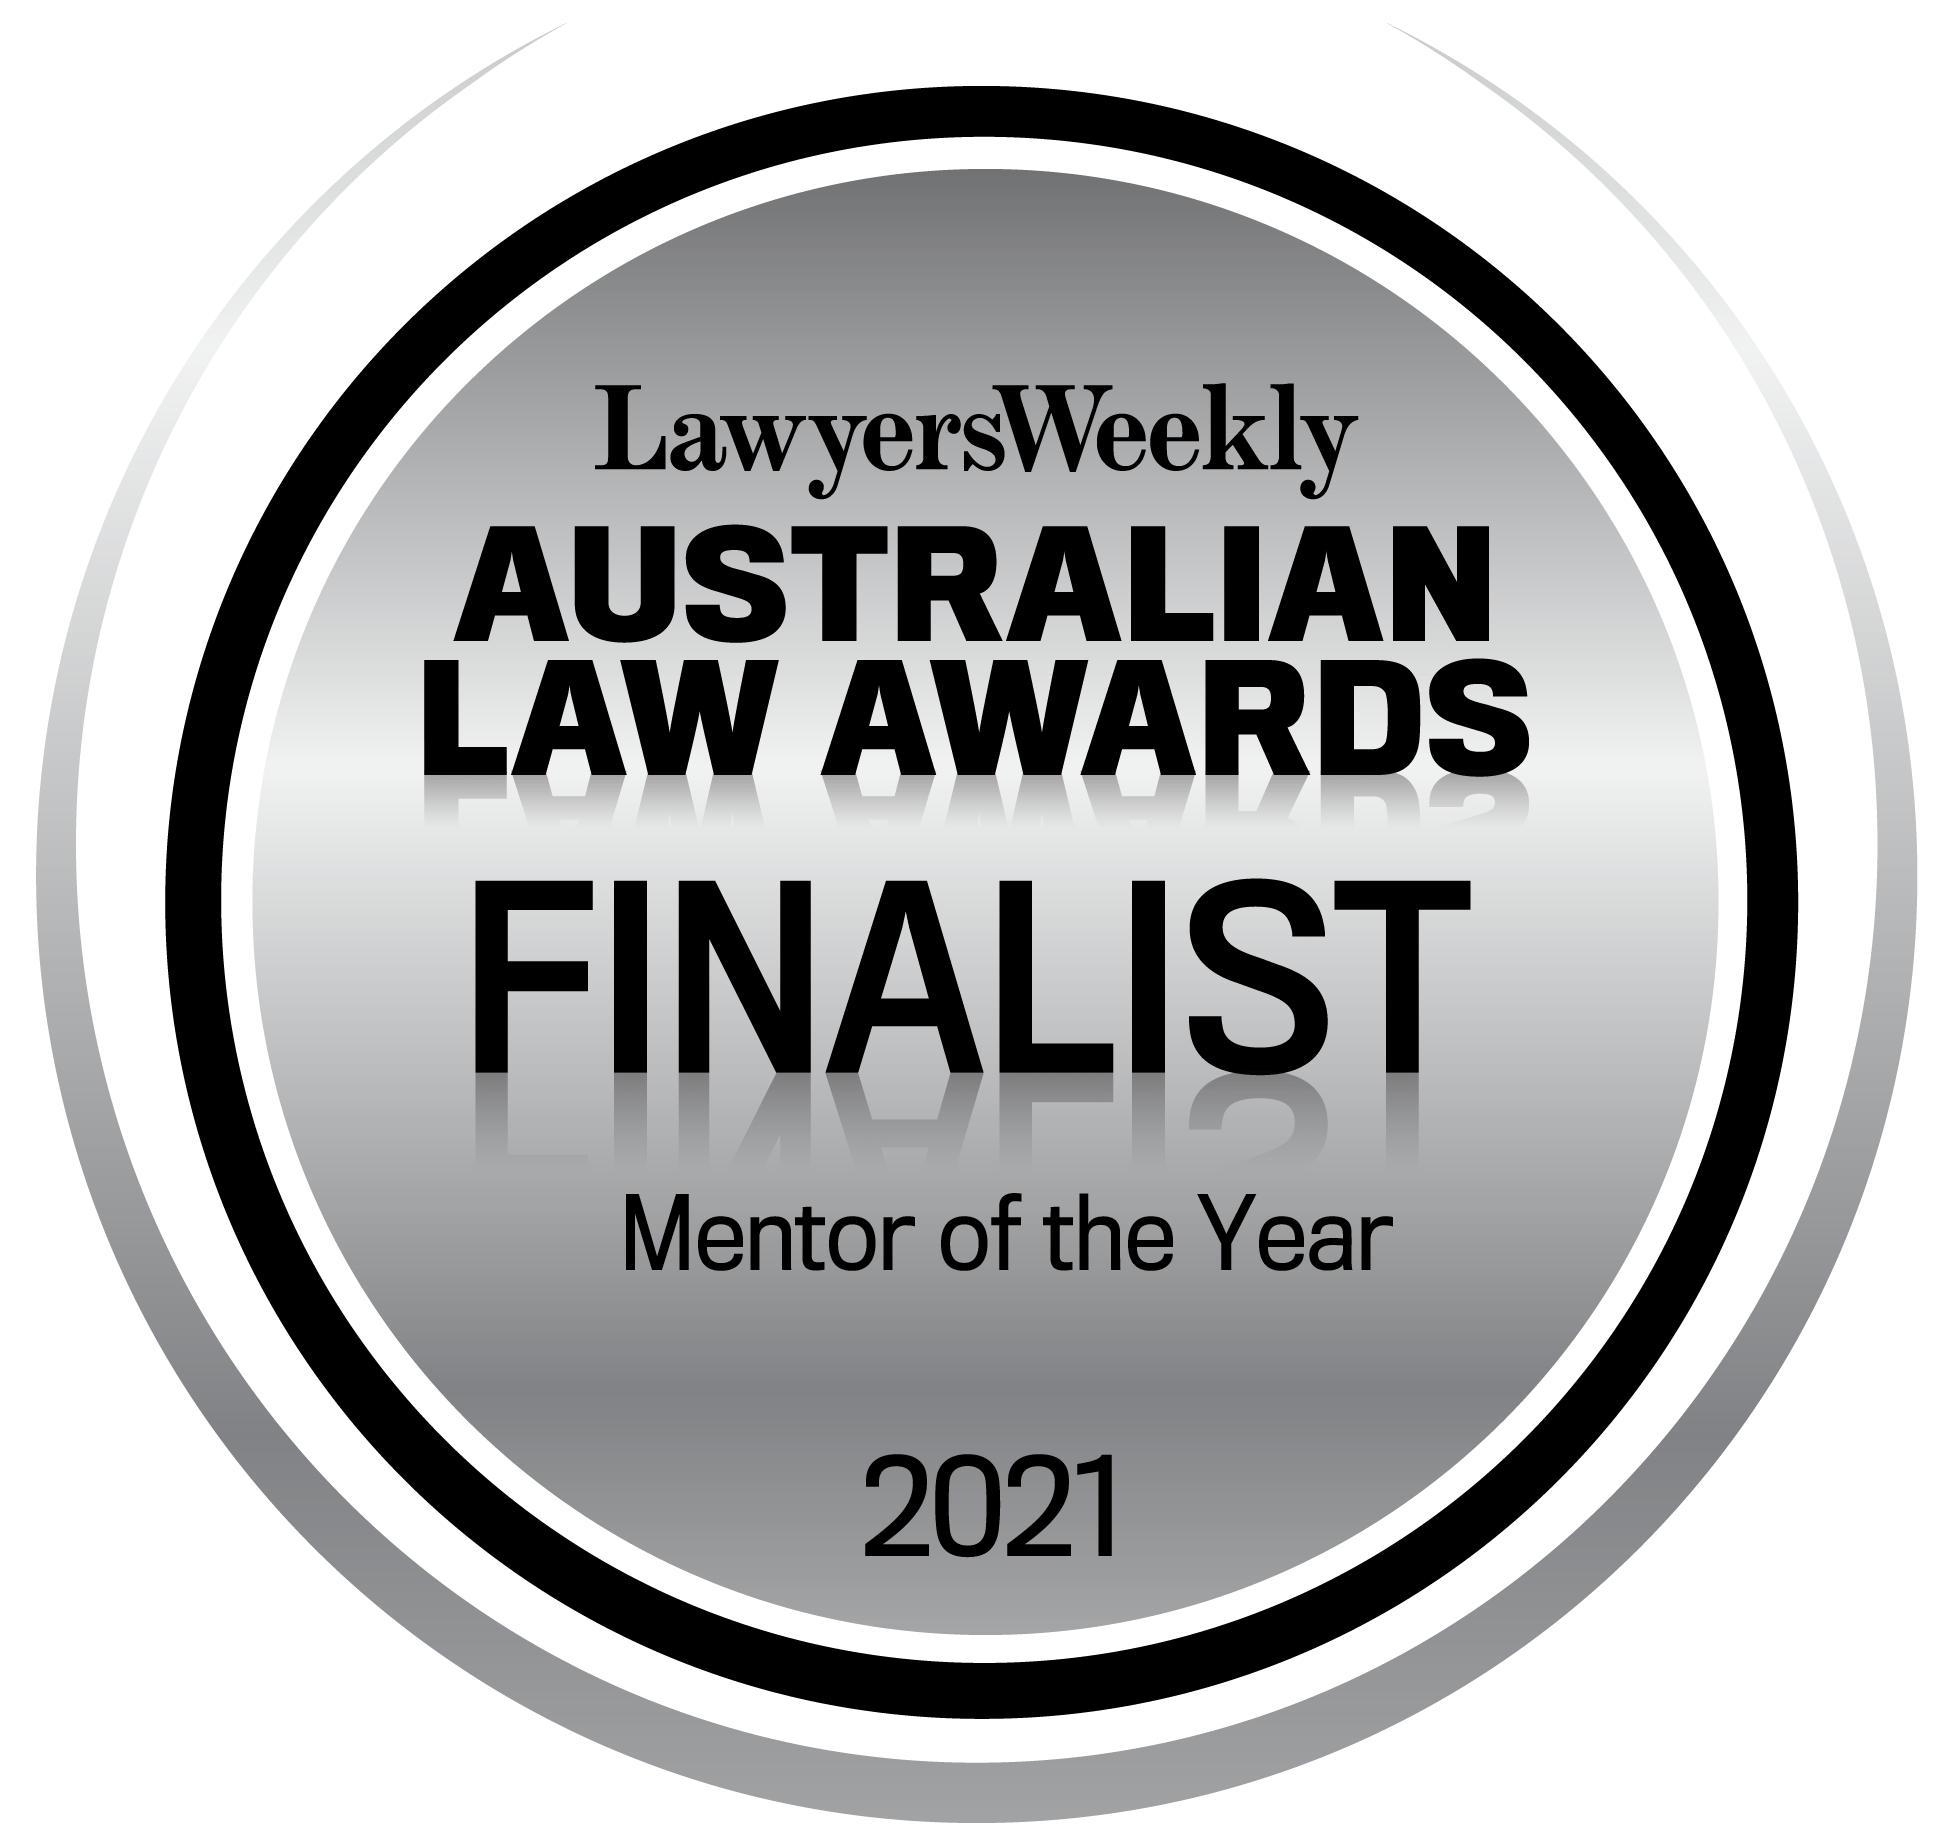 FINALIST – Mentor of the Year, Lawyers Weekly Australian Law Awards 2021